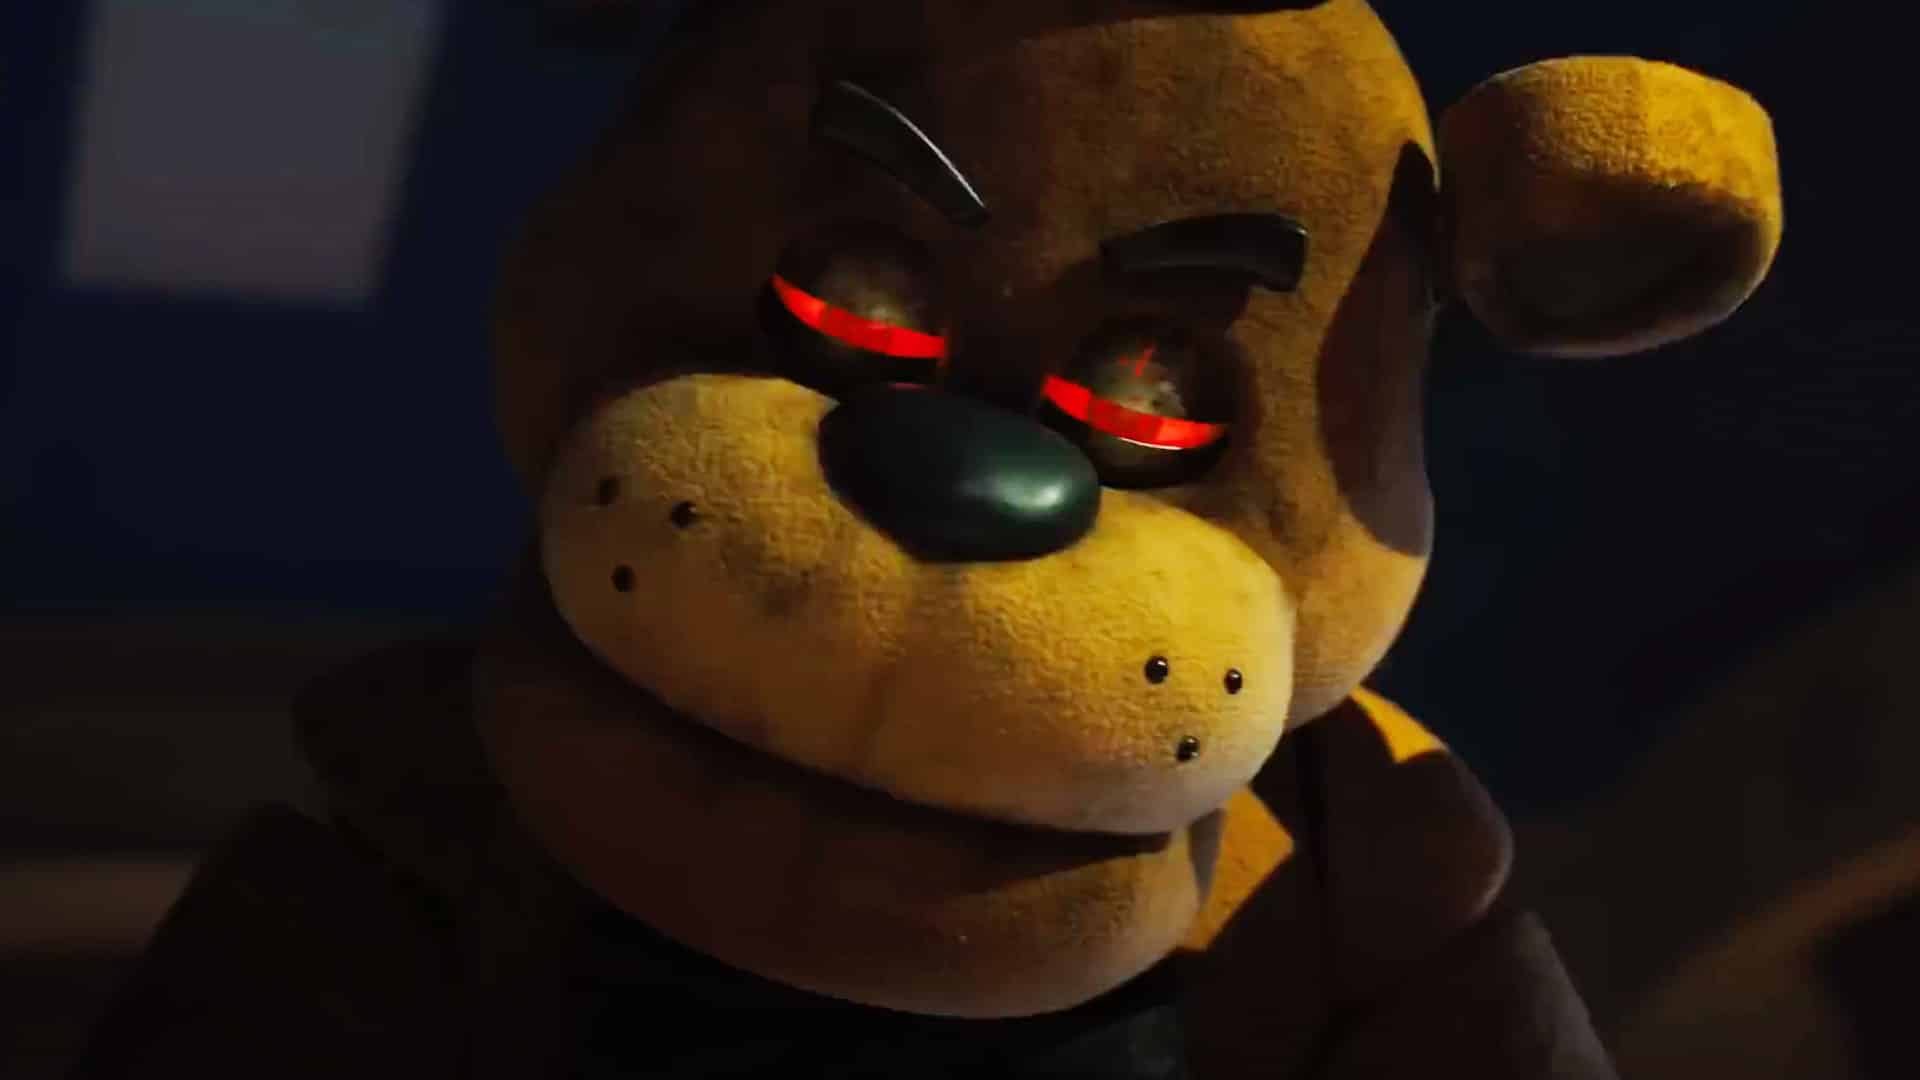 Five Nights At Freddy's' Review: Movie Version Of Video Game